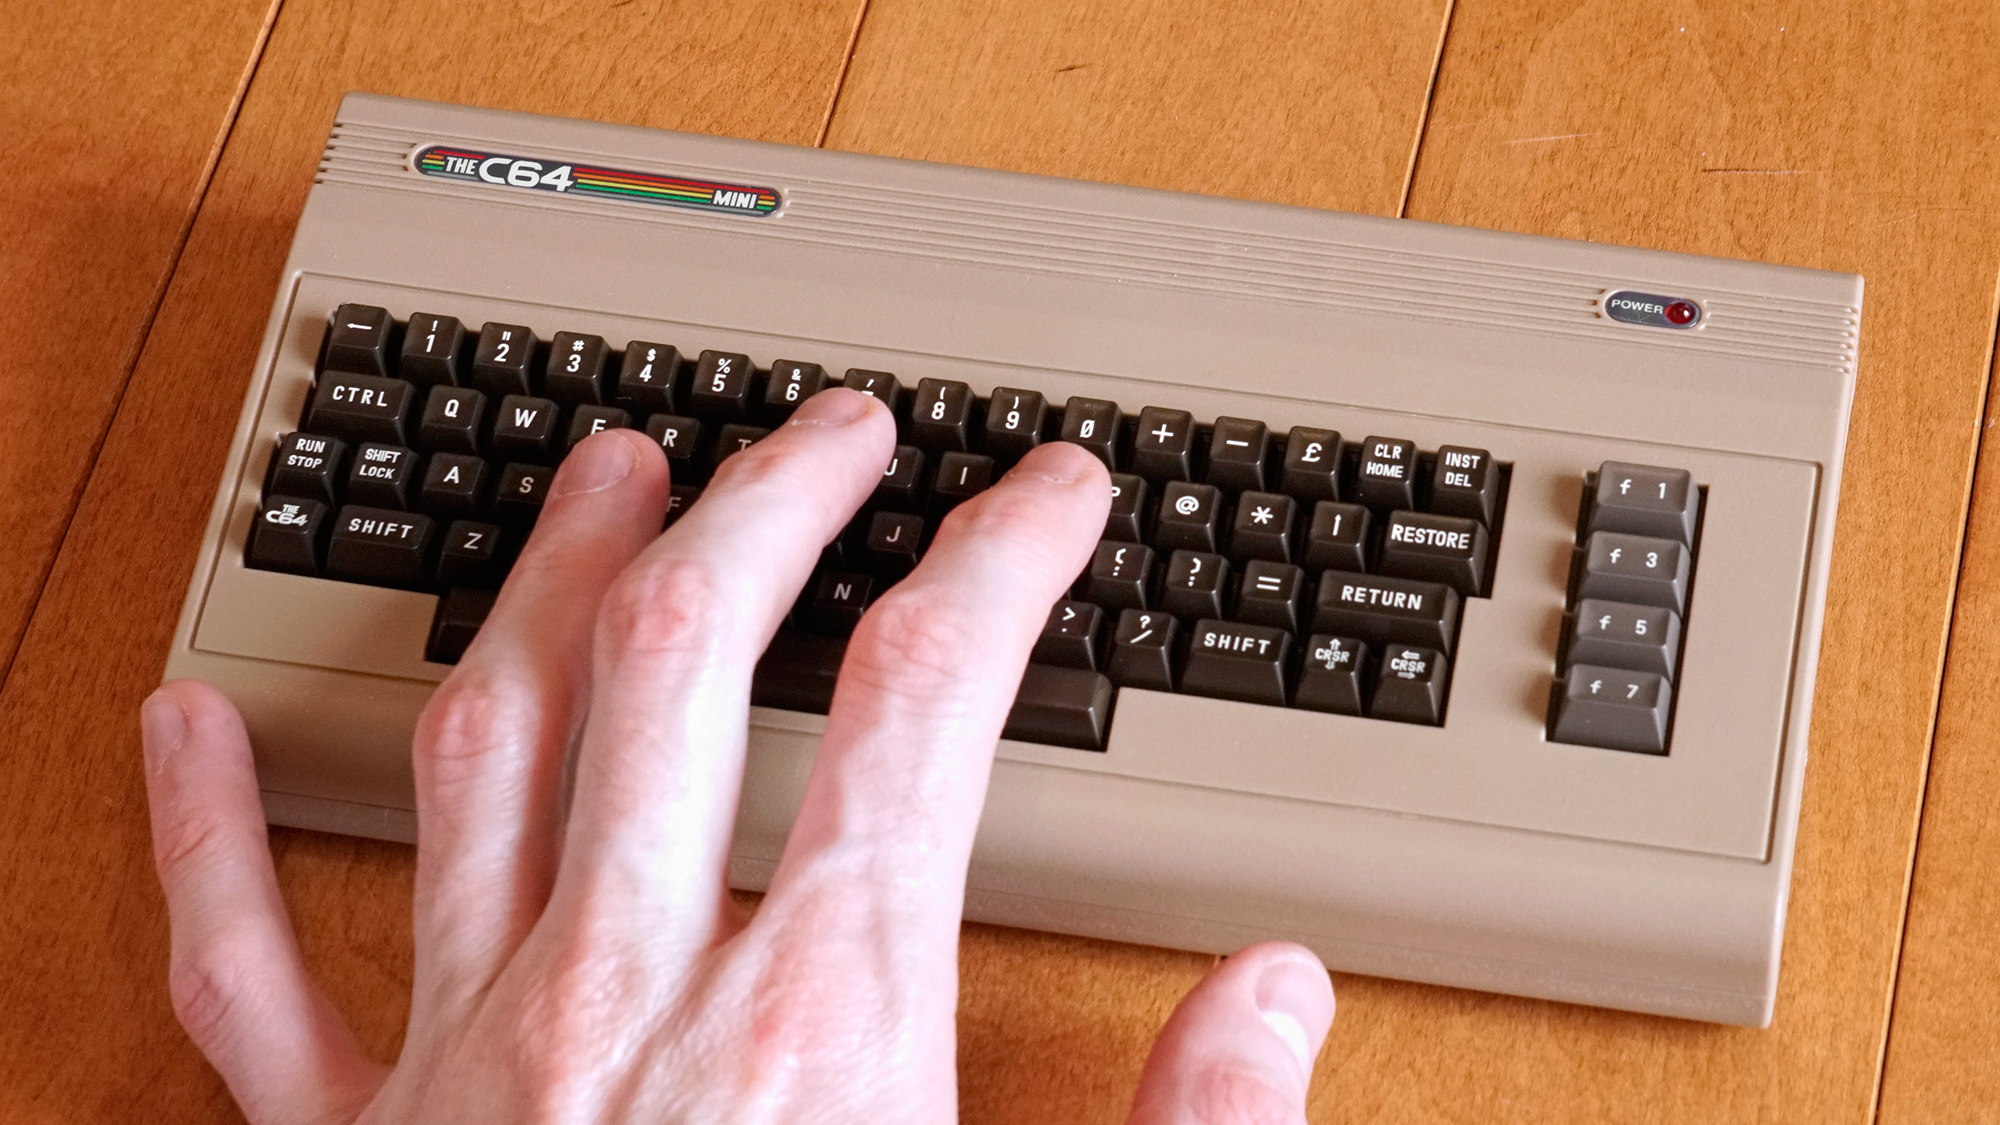 This Tiny Clone Perfectly Recreates The Commodore 64 Gaming Experience